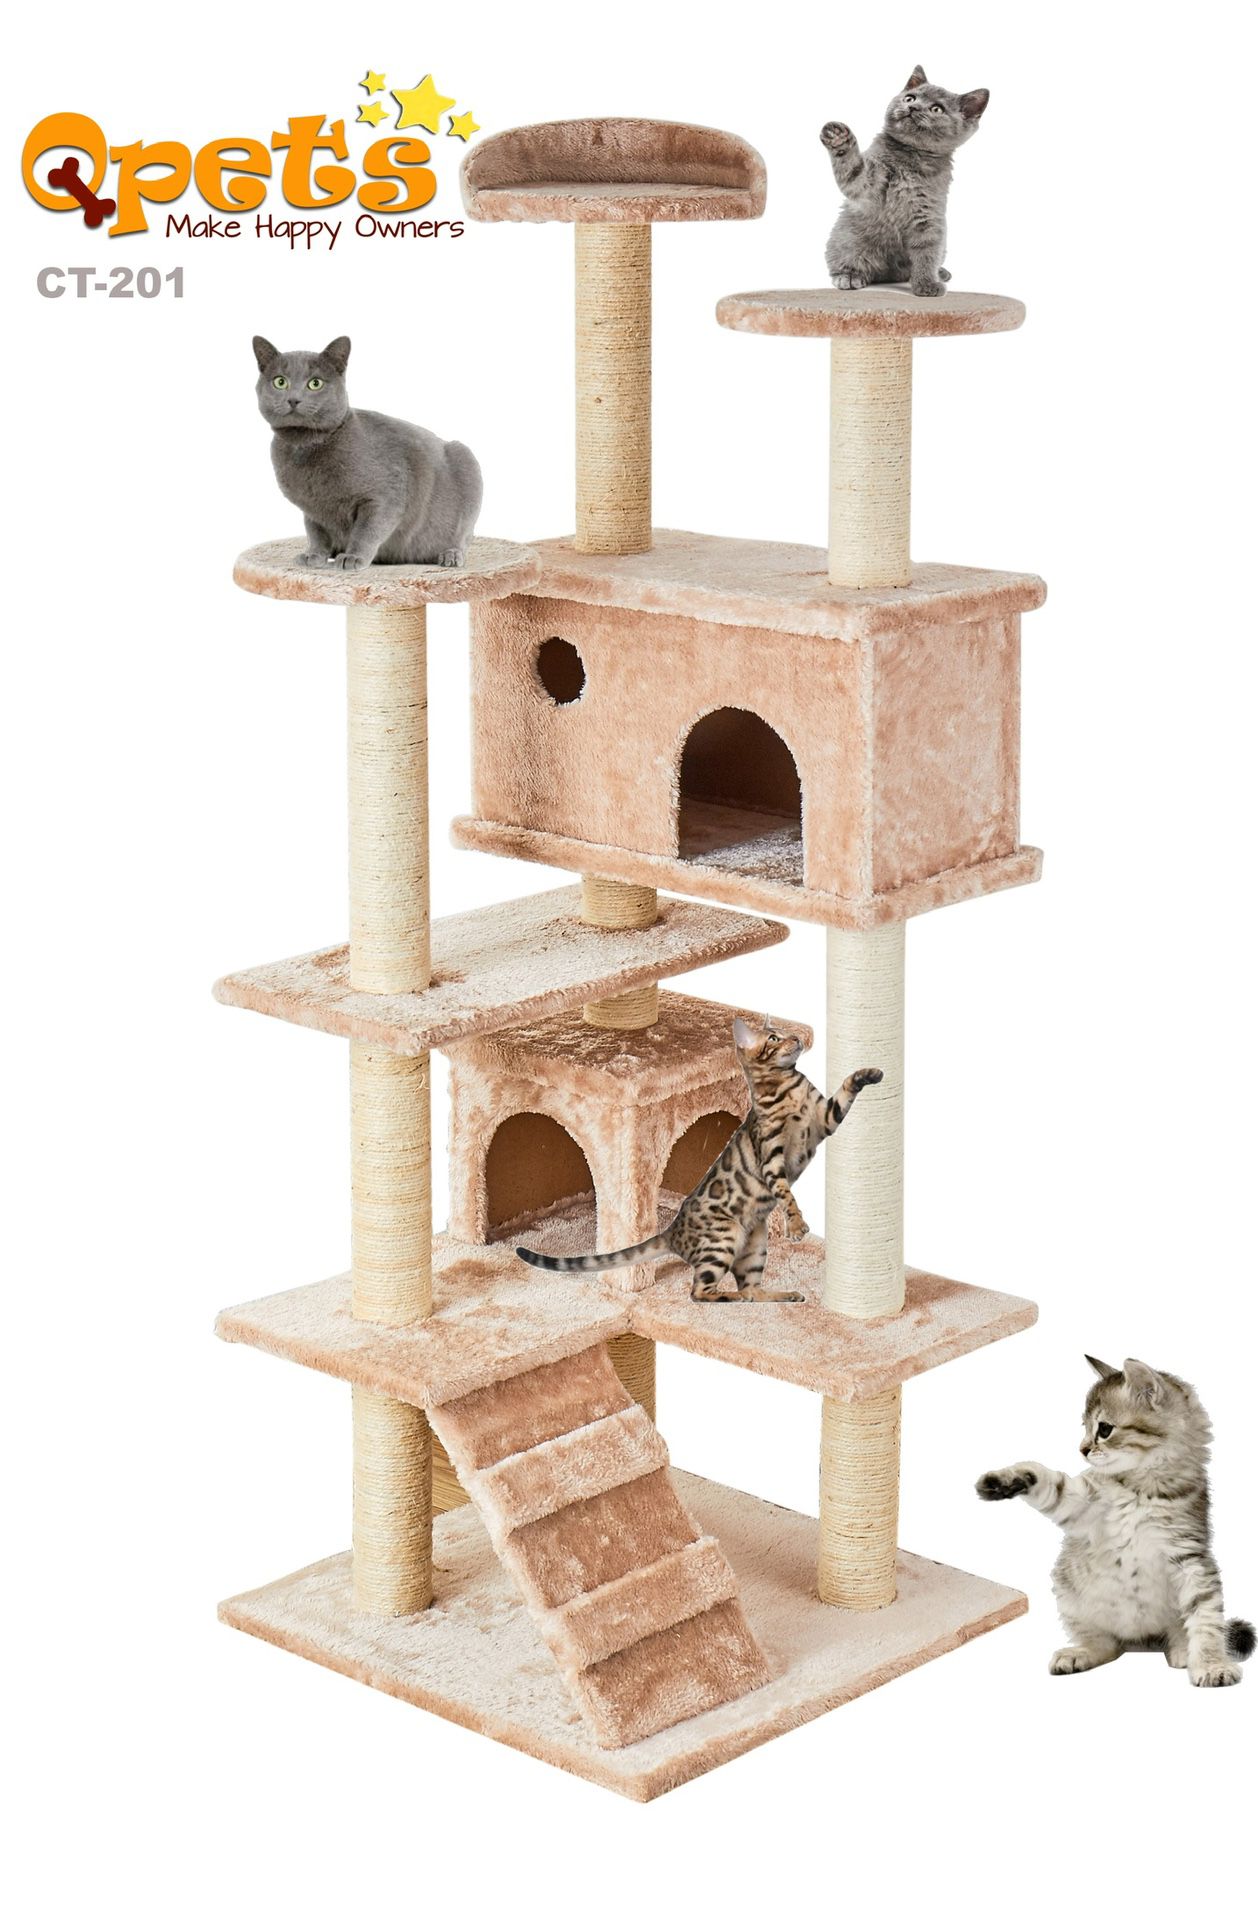 QPets 50” Cat Tree Tower CT-201